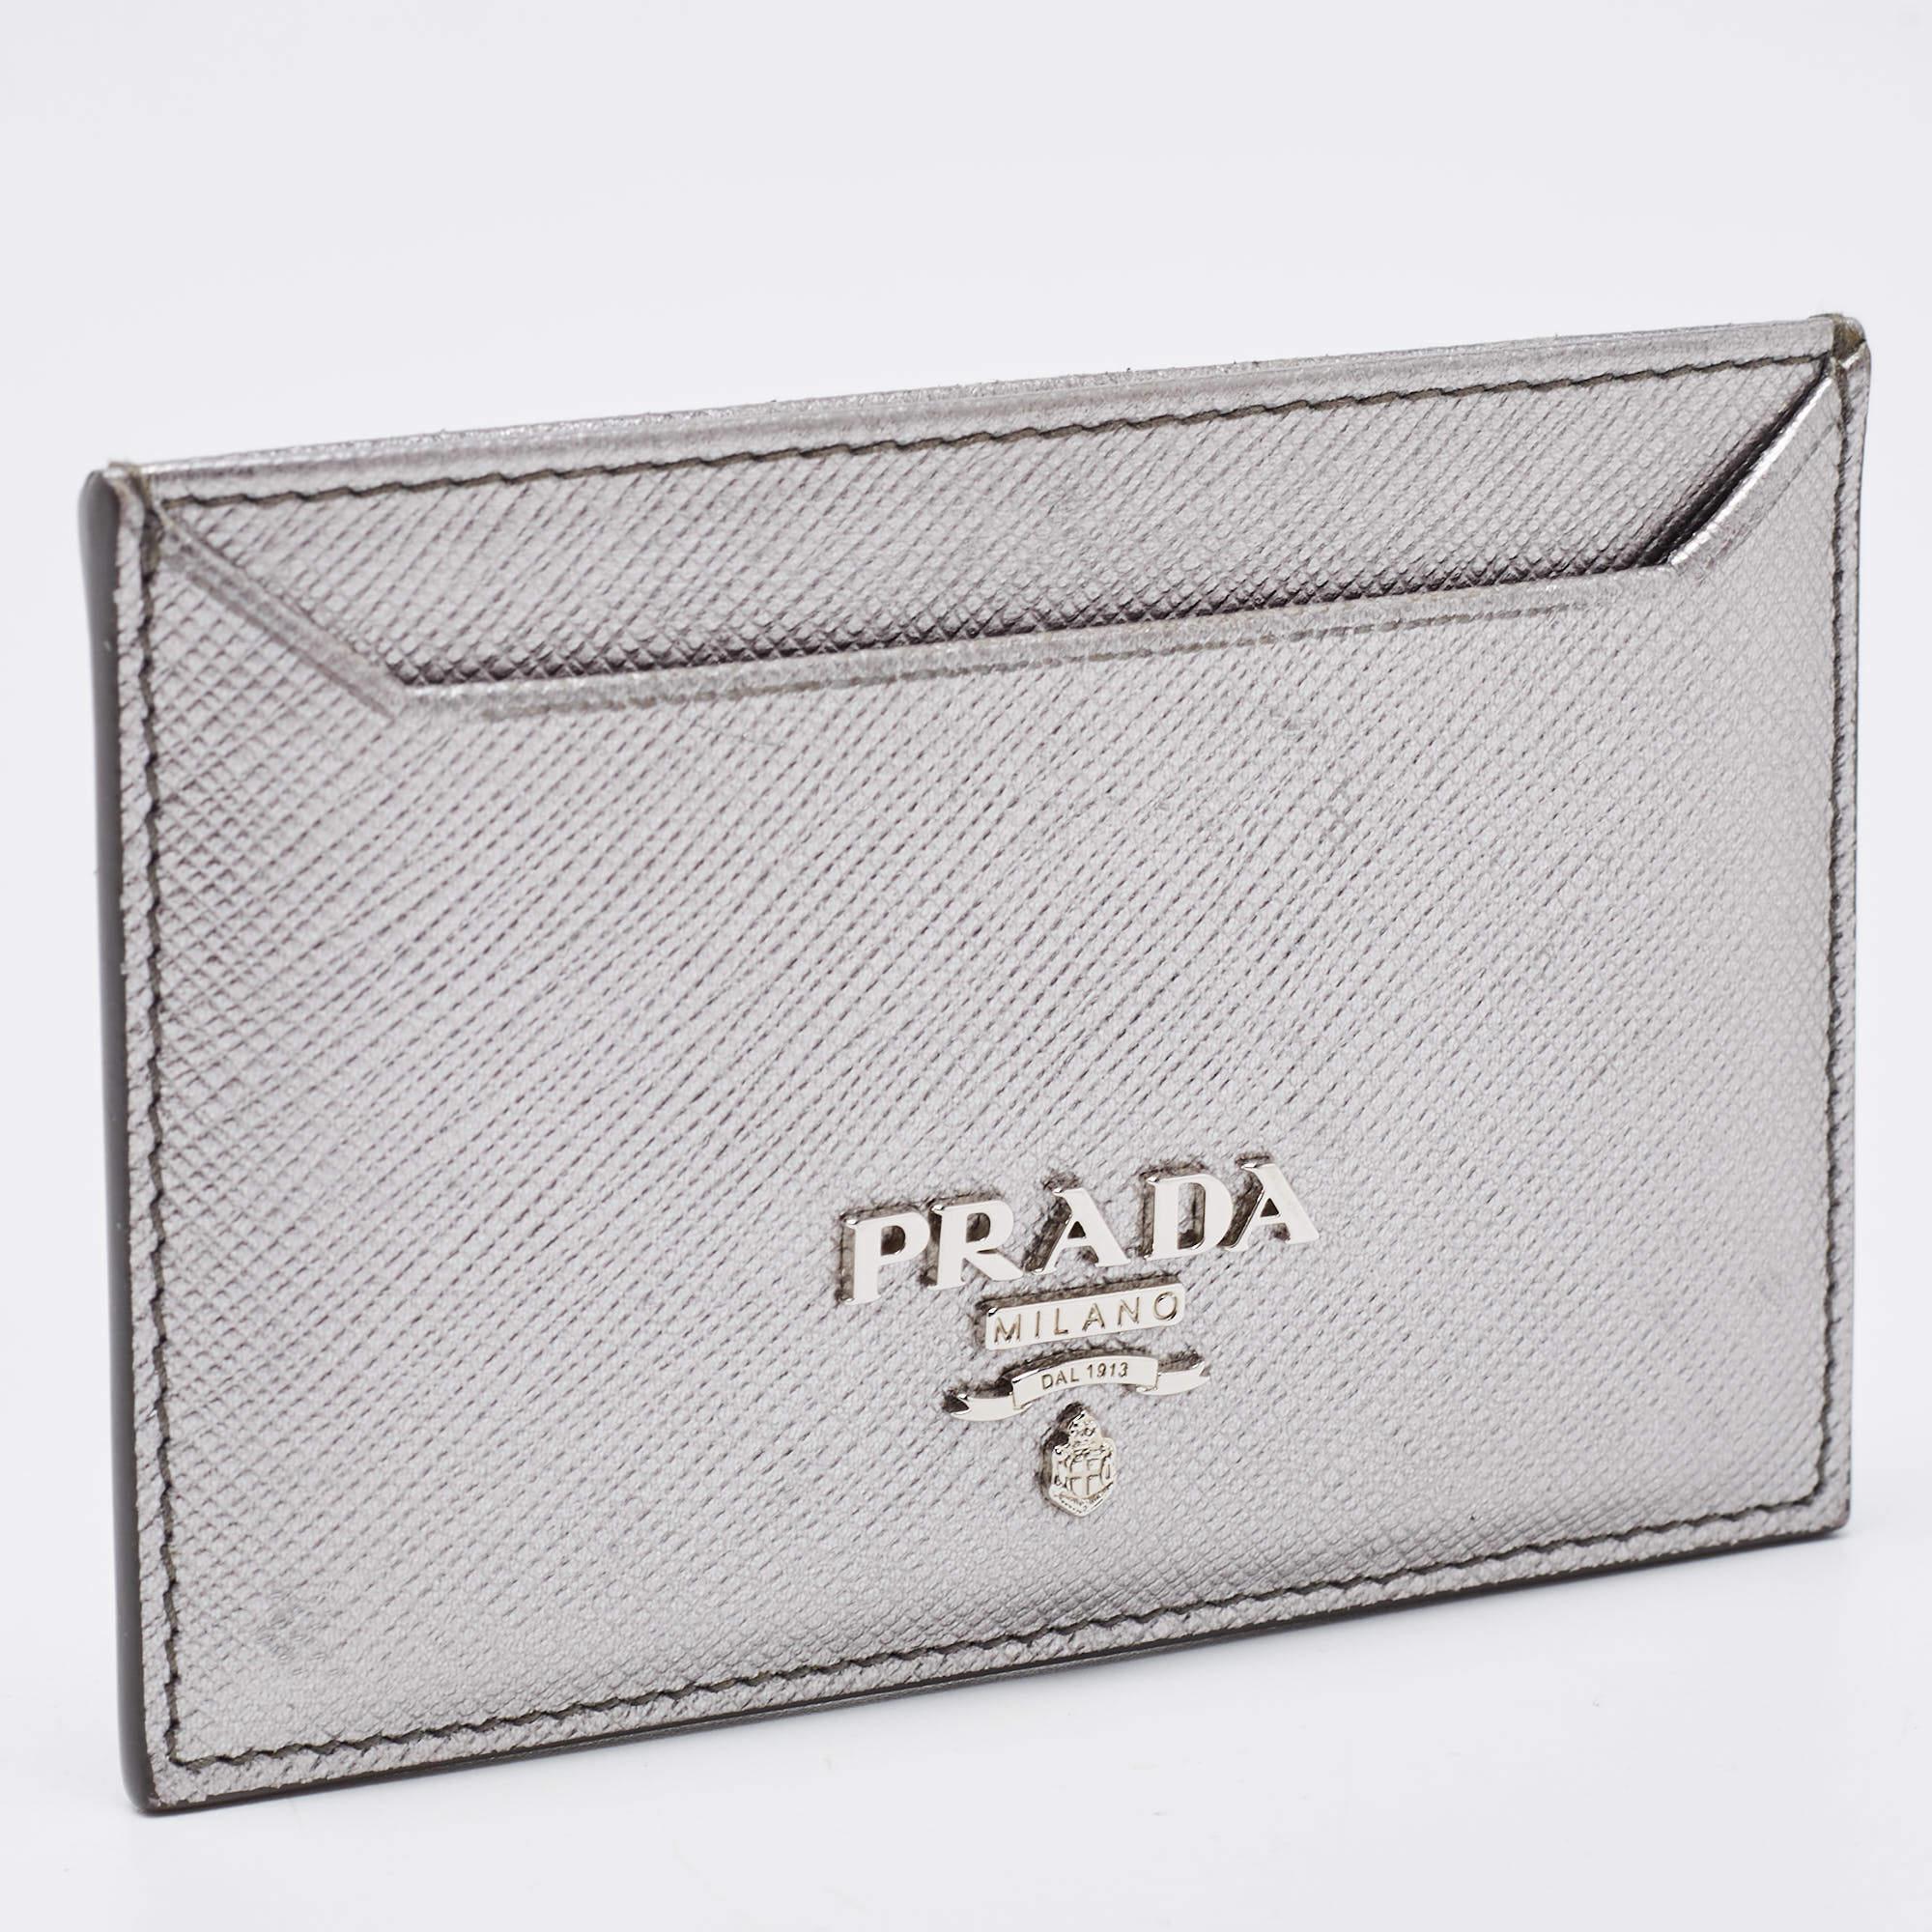 This stylish and functional cardholder is a must-have in your collection. It is equipped with multiple, well-lined slots to hold your cards.

